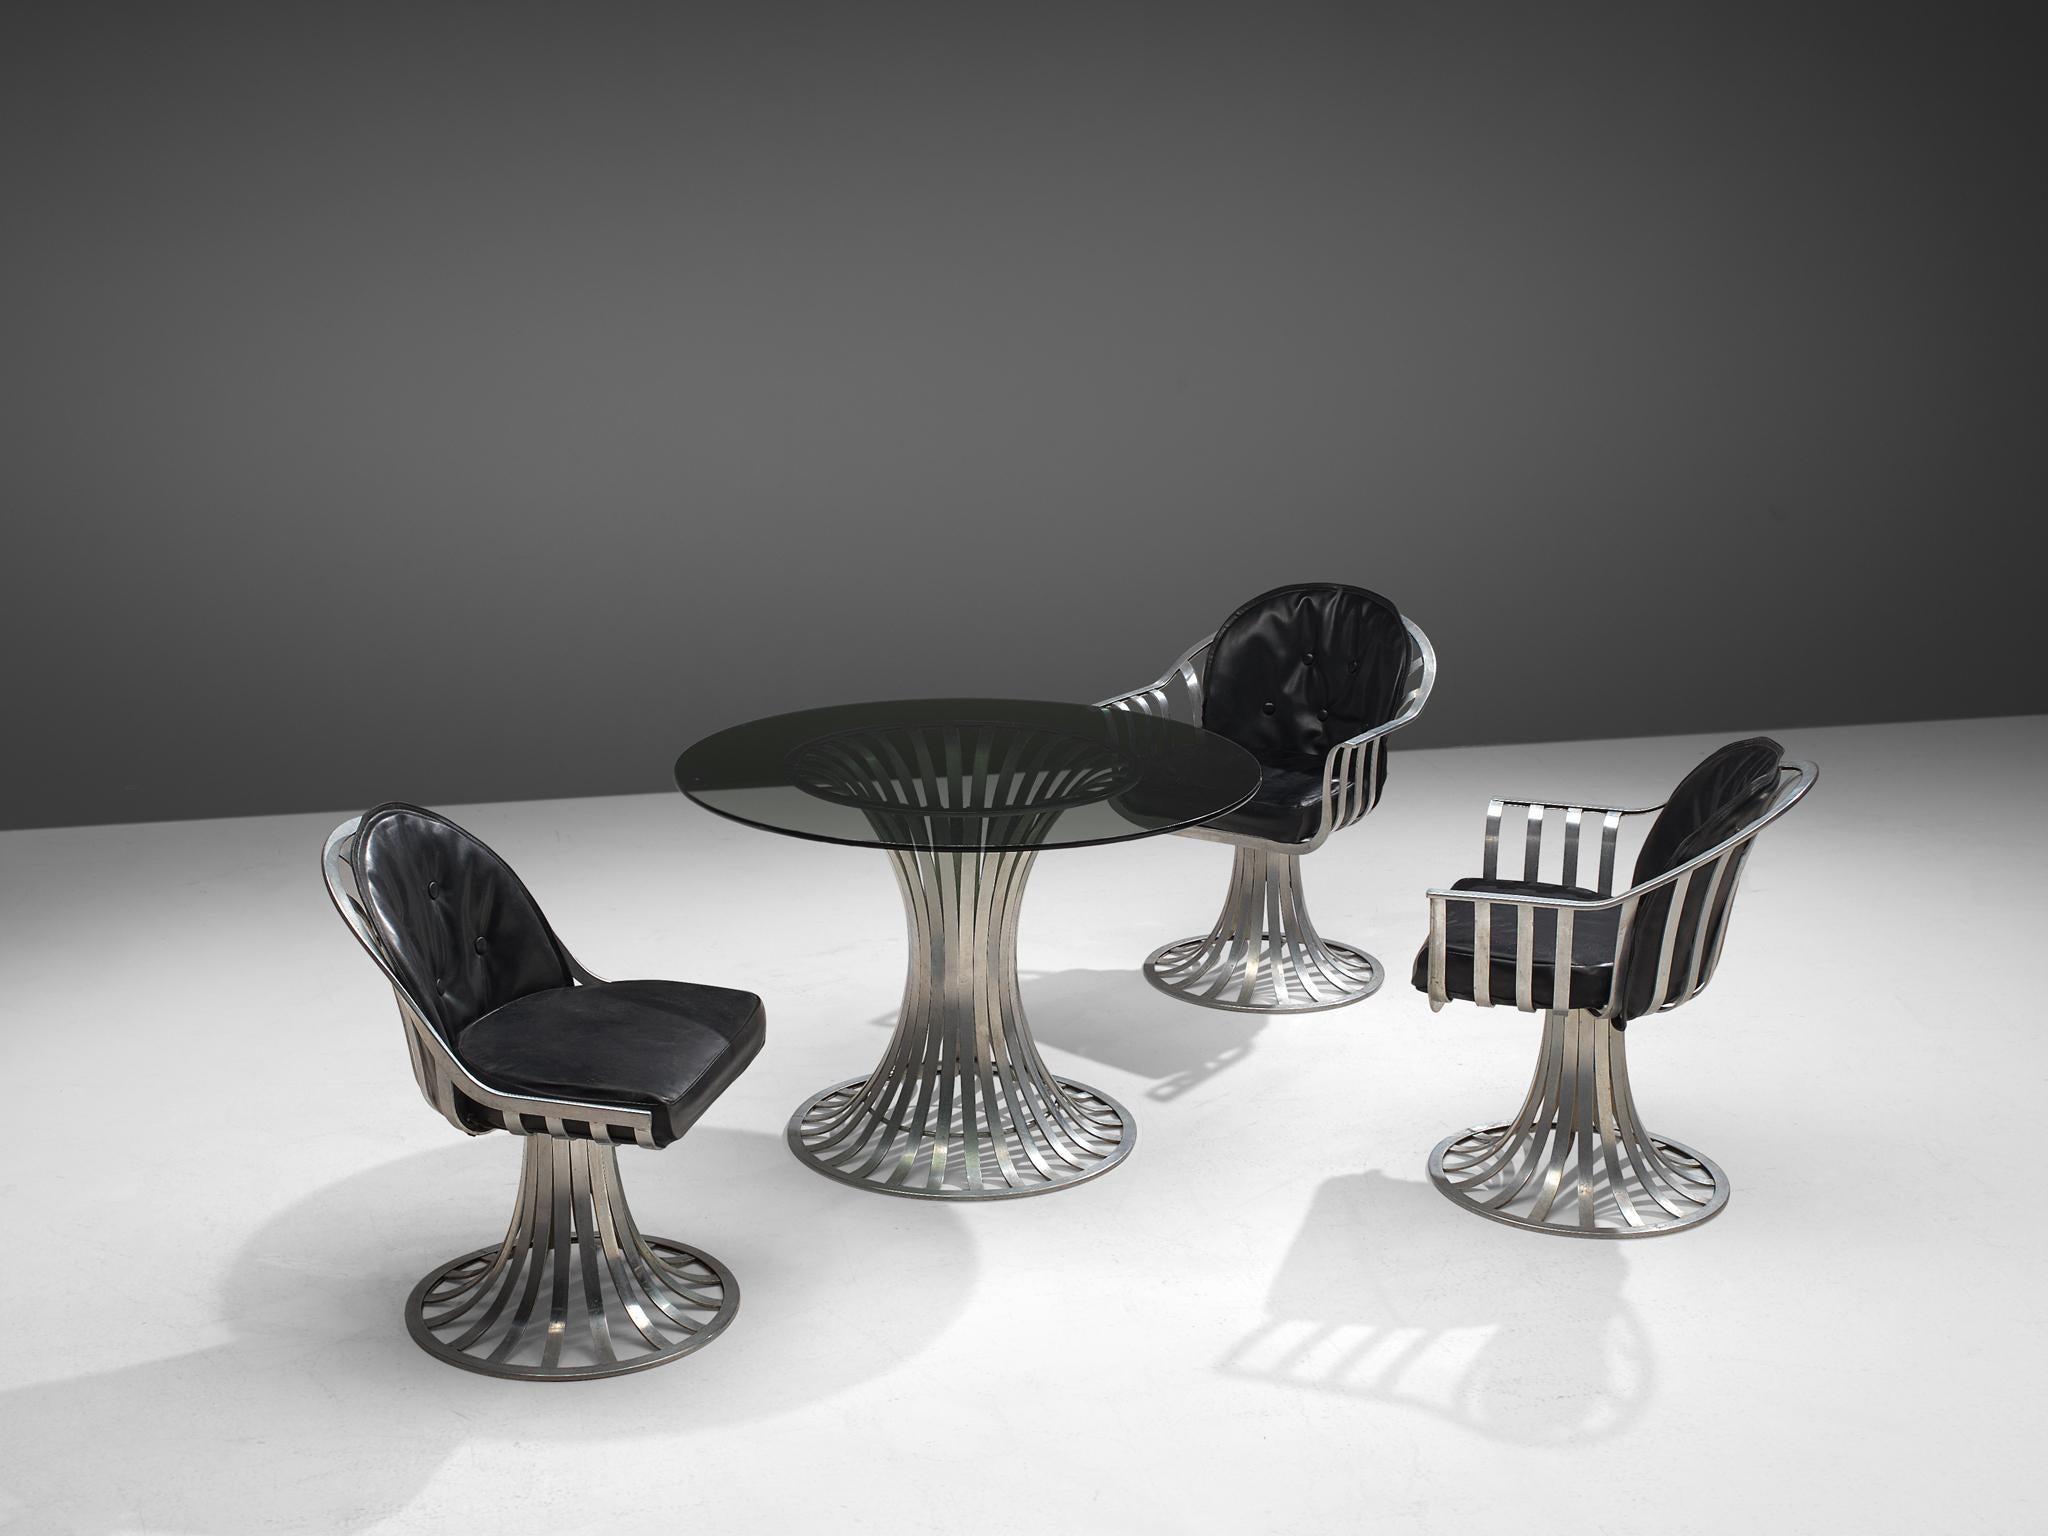 Russell Woodard, dining set, leatherette, glass and aluminum, United States, 1960s.

This stylized dining set, consisting of a table, two armchairs and one dining chair was designed by Russell Woodard and produced by the Lee L. Woodard and Sons